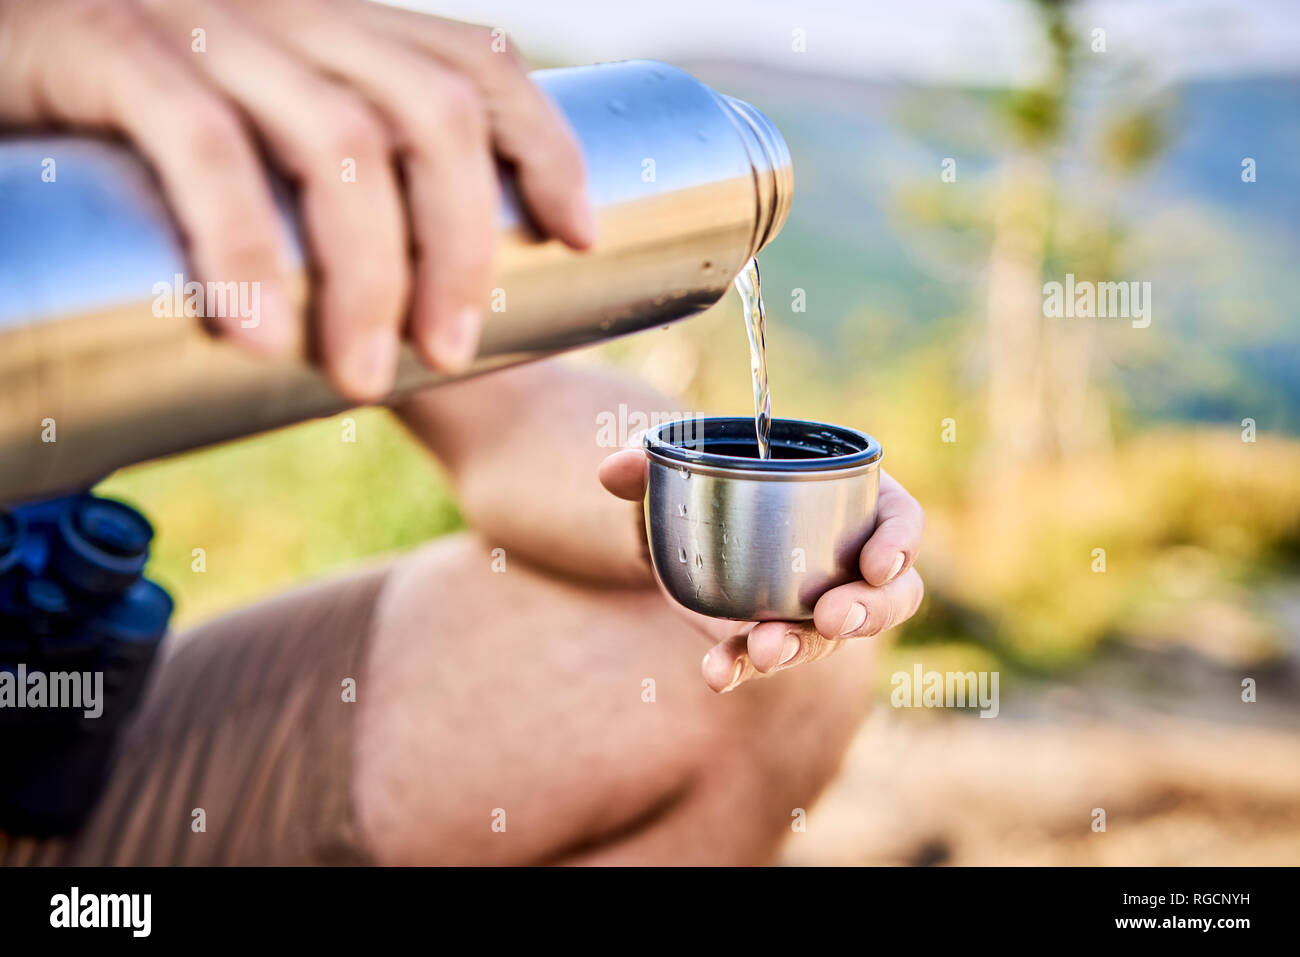 Close-up of man during hiking trip pouring cold water from thermos flask Stock Photo